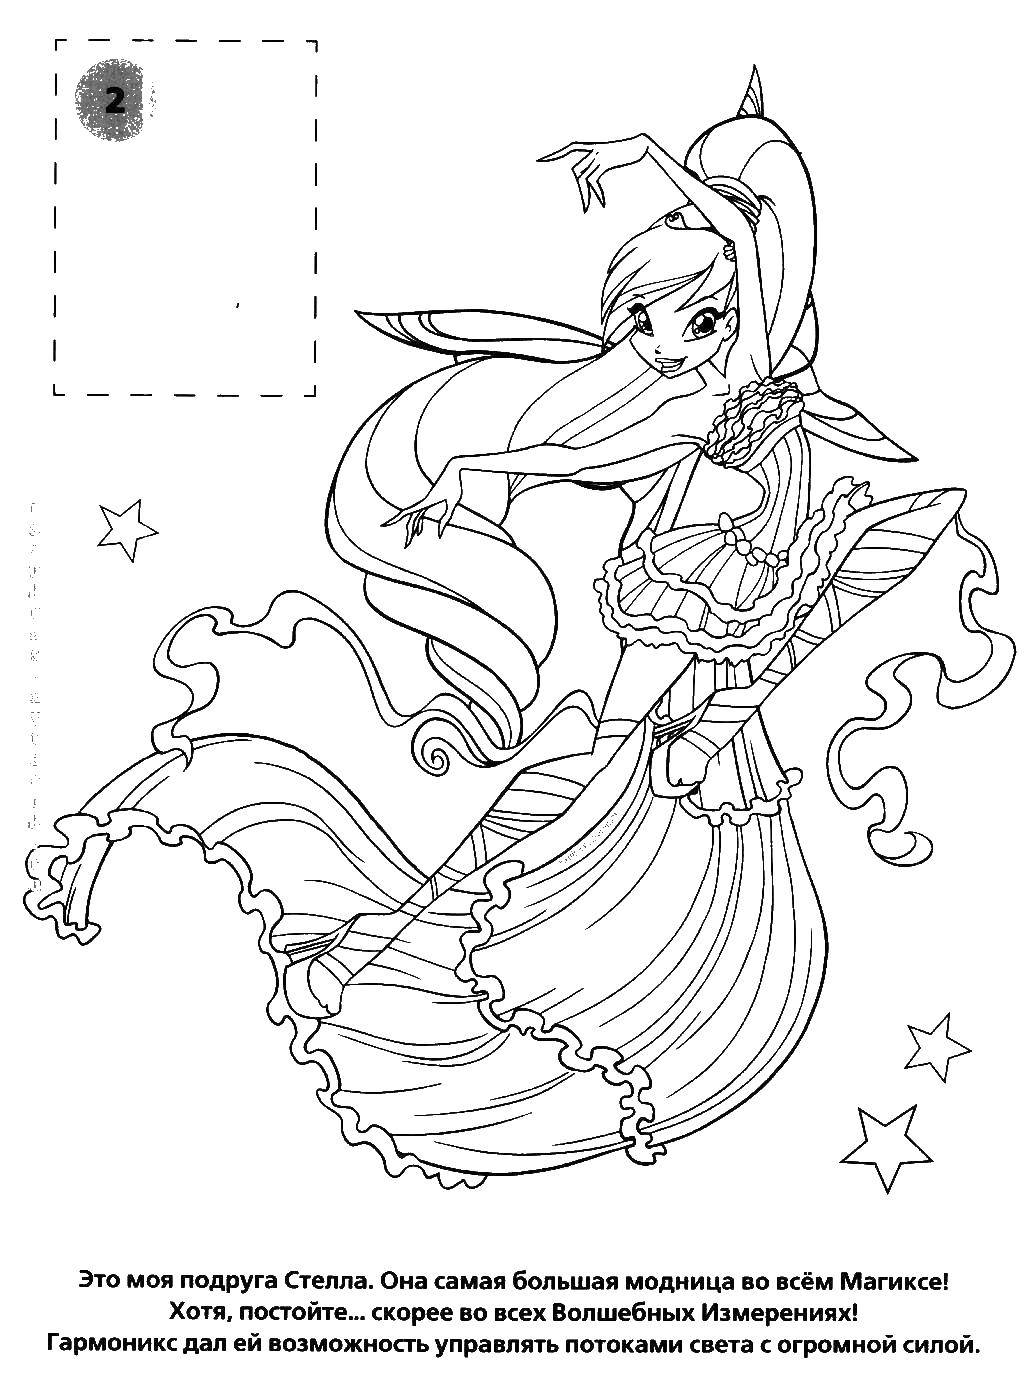 Coloring Stella from winx club. Category Winx. Tags:  Stella, Winx.